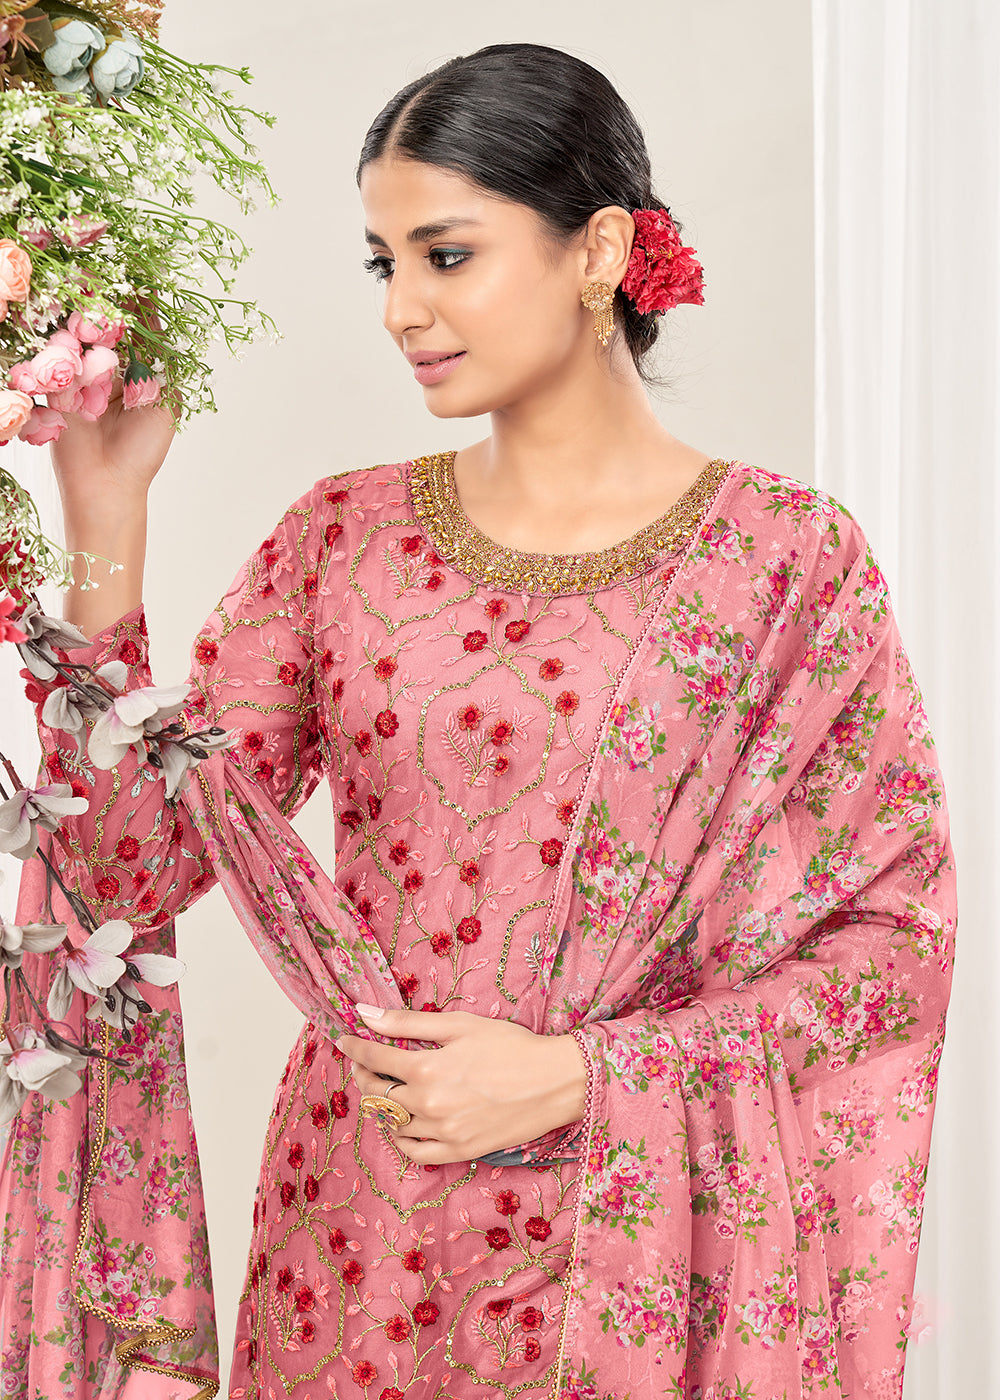 Buy Now Exclusive Pink Festive Look Net Patiala Salwar Suit Online in USA, UK, Canada, Germany, Australia & Worldwide at Empress Clothing.